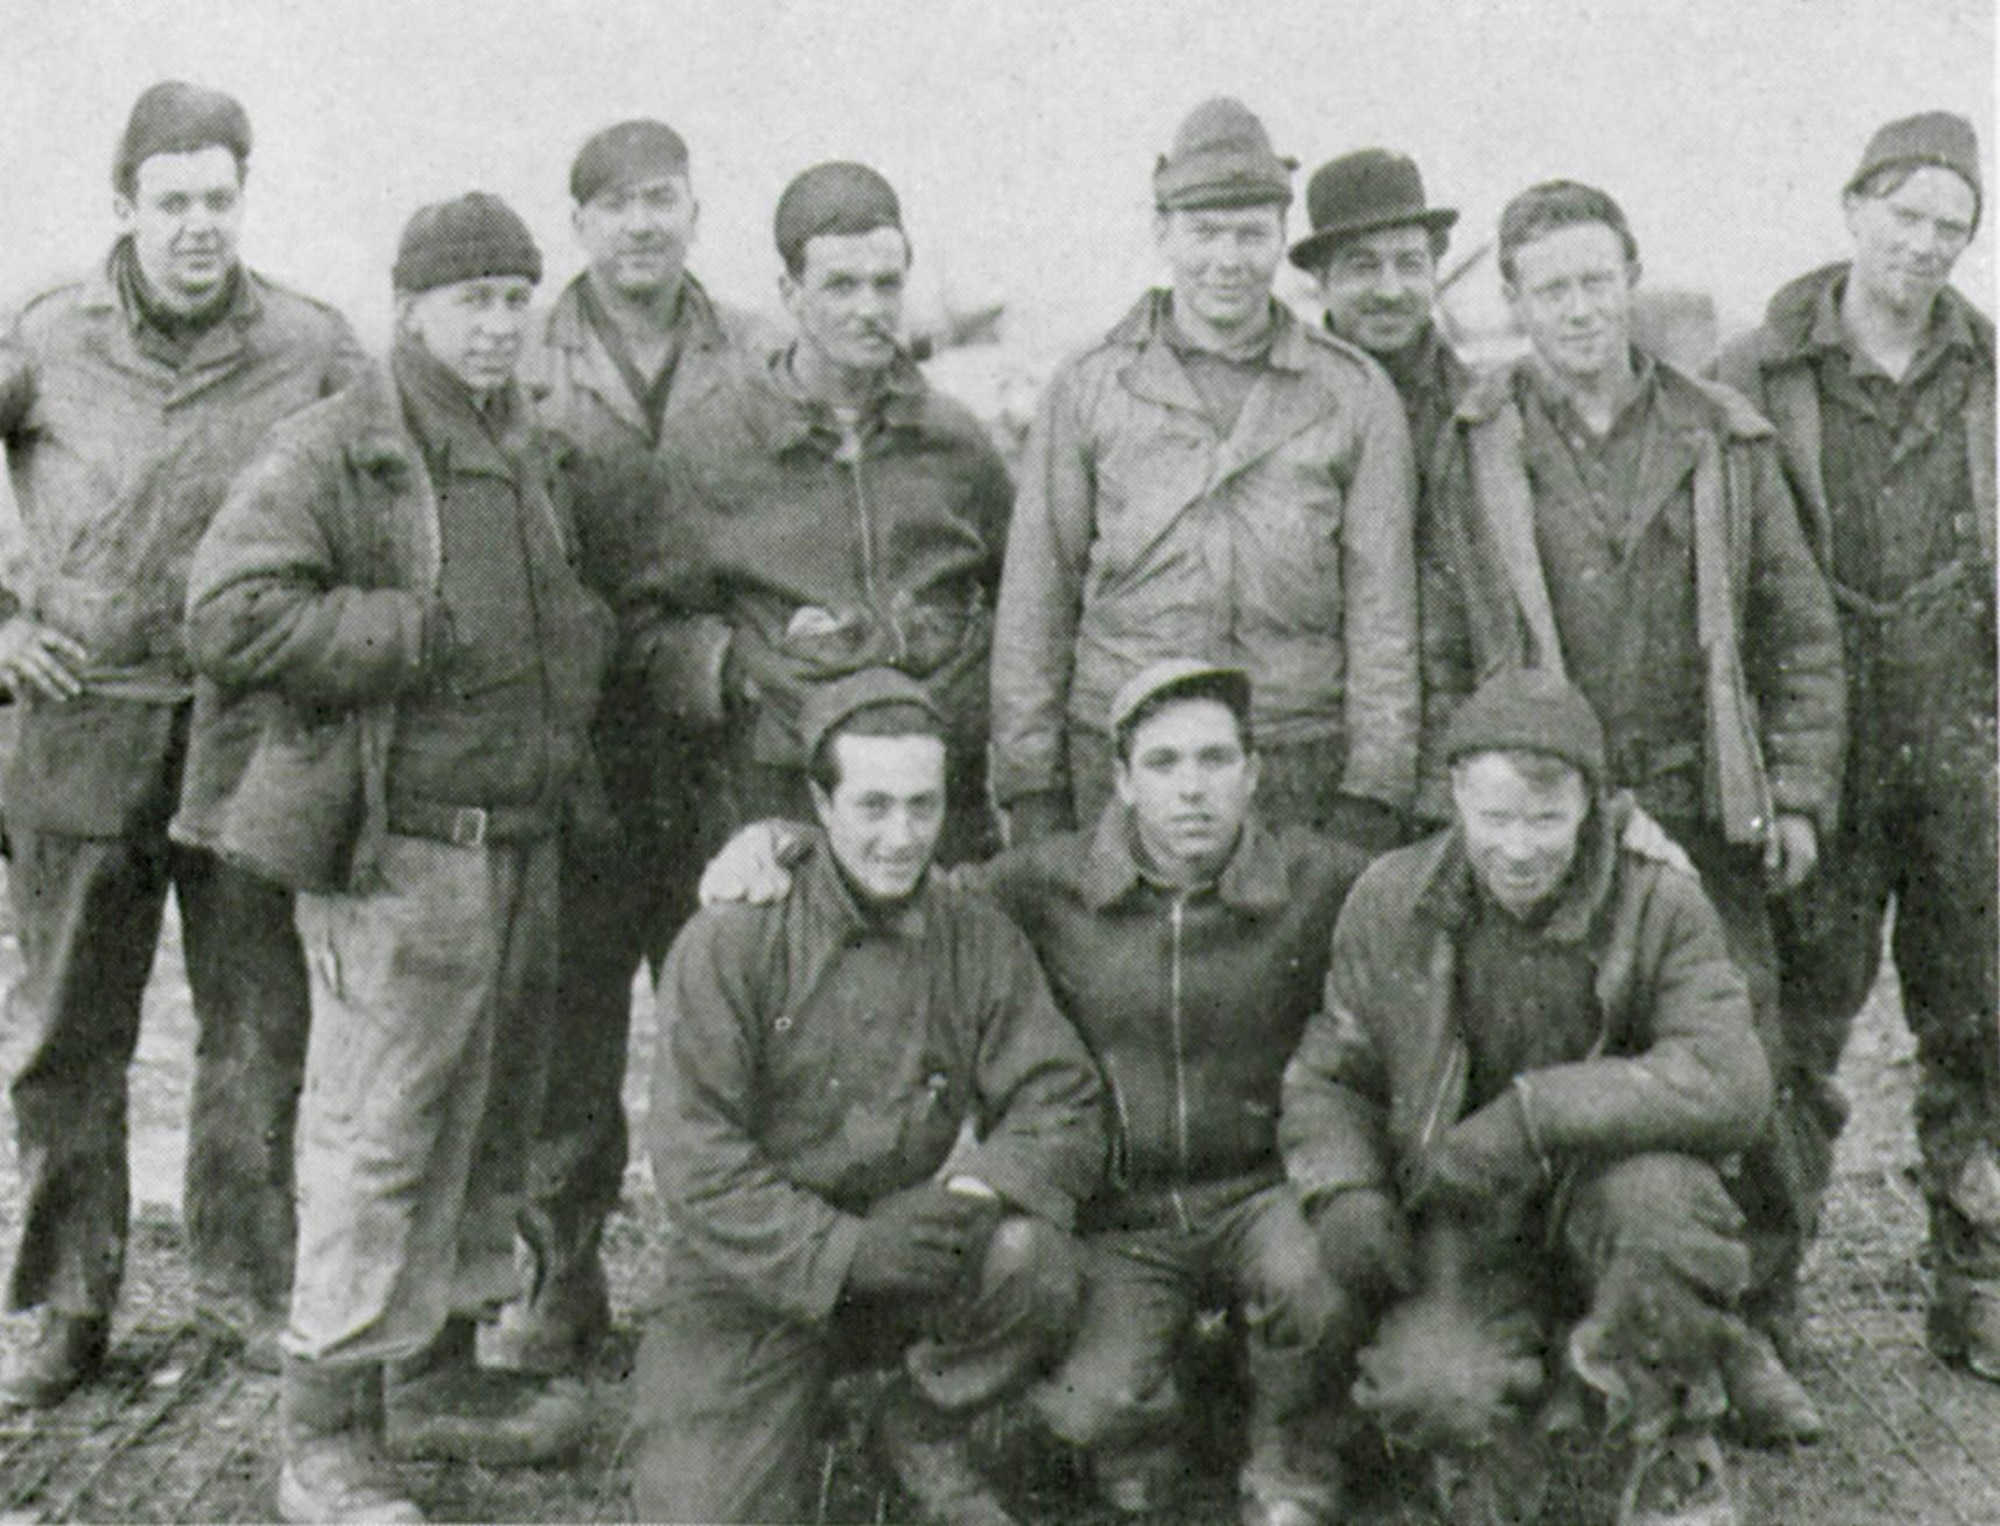 Enlisted men of the 405th Fighter Squadron who kept their Thunderbolts going in all kinds of conditions assemble for a flightline picture at a rugged airfield during some miserable winter weather.  Shown are their final wartime ranks.  Standing from left to right are S/Sgt John S. Piotrowski, Sgt. Donald E. Wright, S/Sgt Conrad M. Shelley, Sgt. Paul S. Kikta, T/Sgt William A. Morrison, S/Sgt Joseph L. Guarin, S/Sgt Francis T. Parker, Sgt. John J. Desmond.  Kneeling left to right are Sgt. Nicholas T. Mistretta, Cpl. Anthony J. Tenore and Sgt. Pearle S. Johnson. (The Story of the 371st Fighter Group in the E.T.O.)